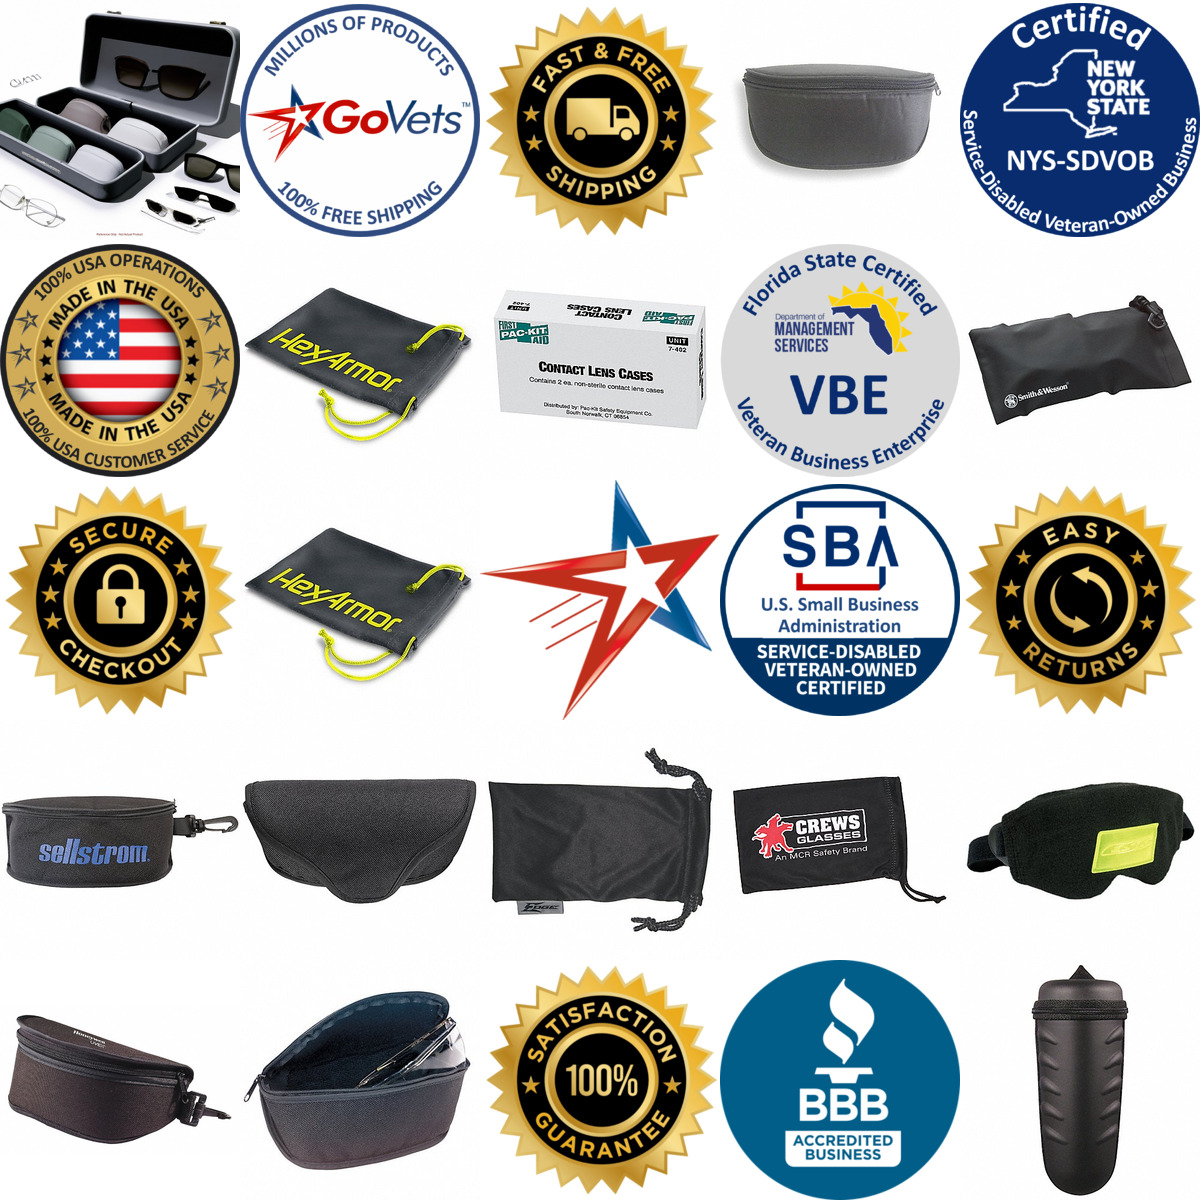 A selection of Eyewear Cases and Bags products on GoVets